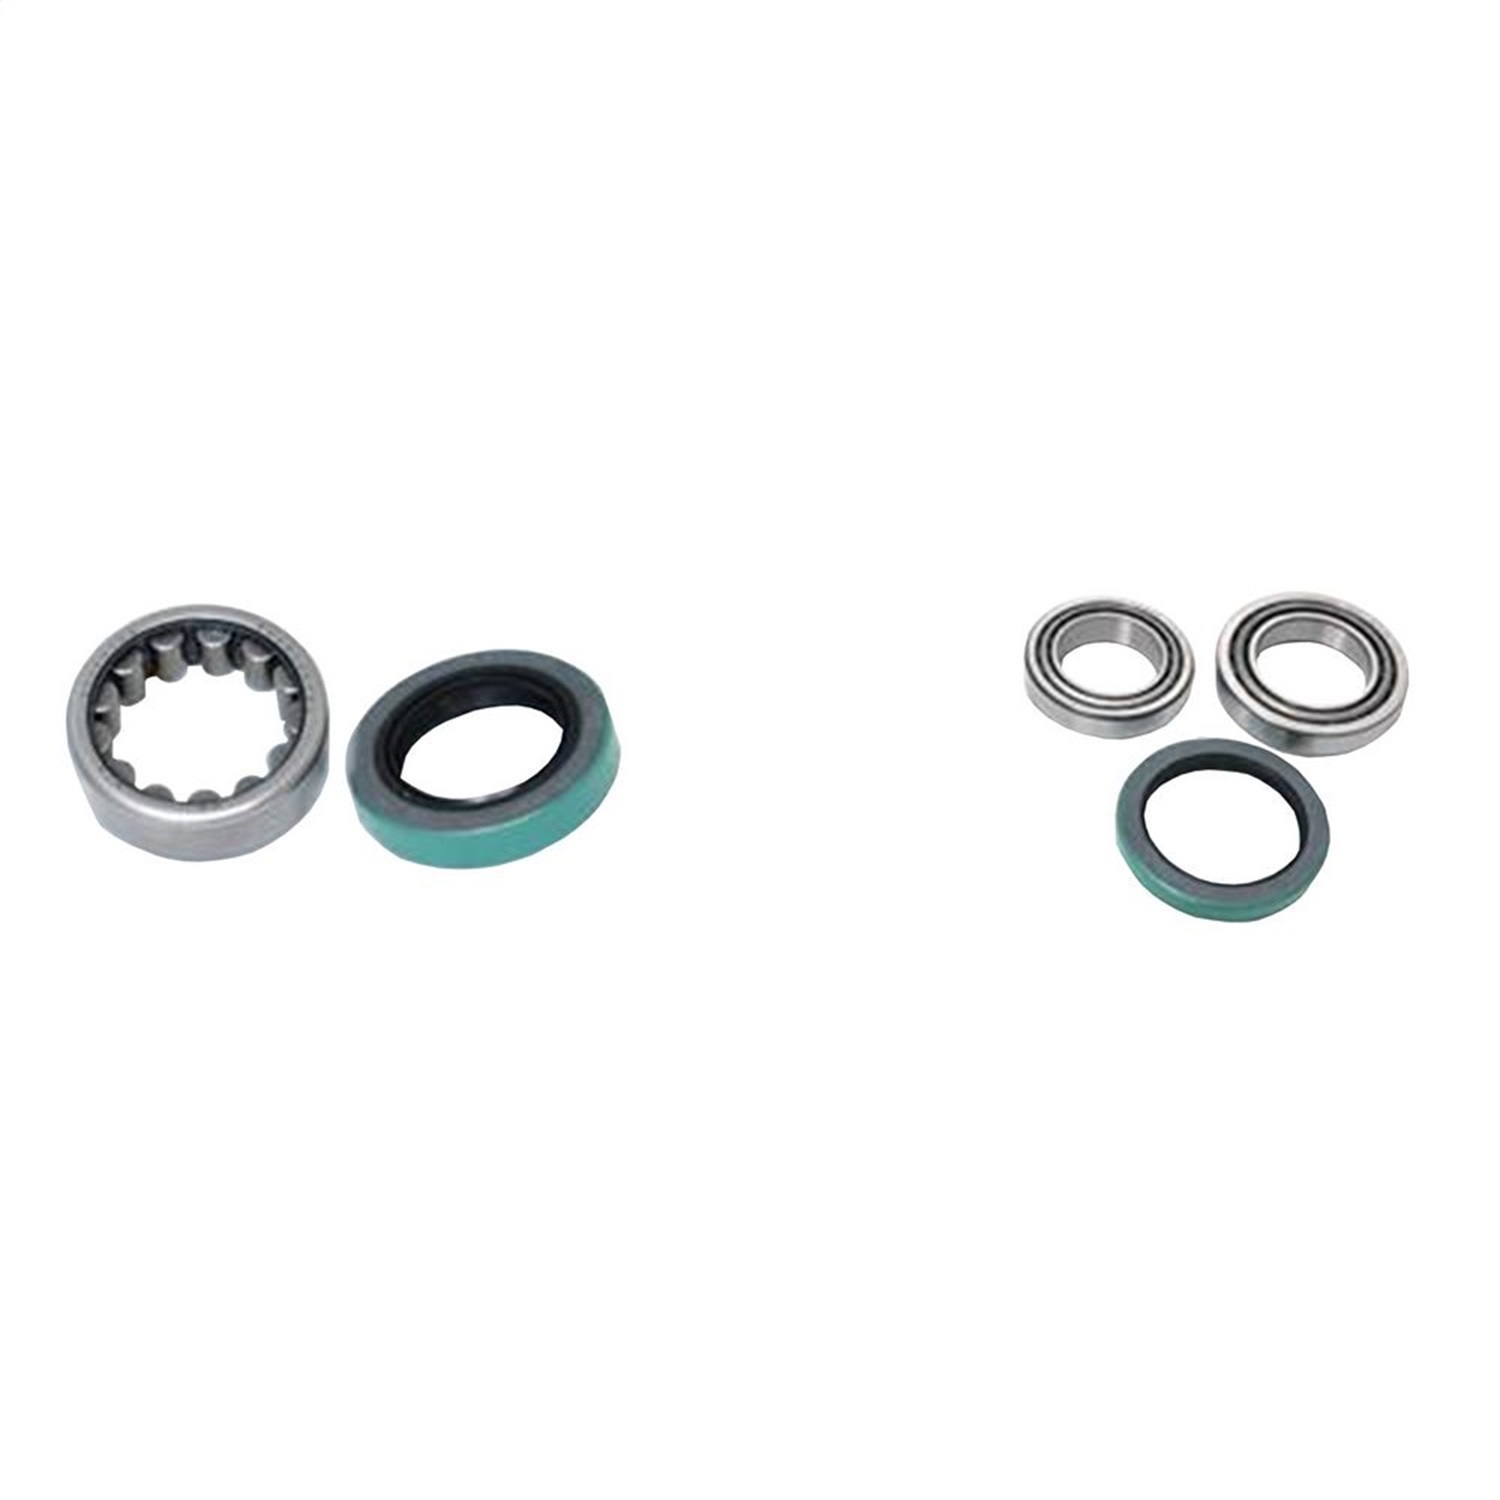 G2 Axle and Gear G2 Axle and Gear 30-9001 Wheel Bearing Kit